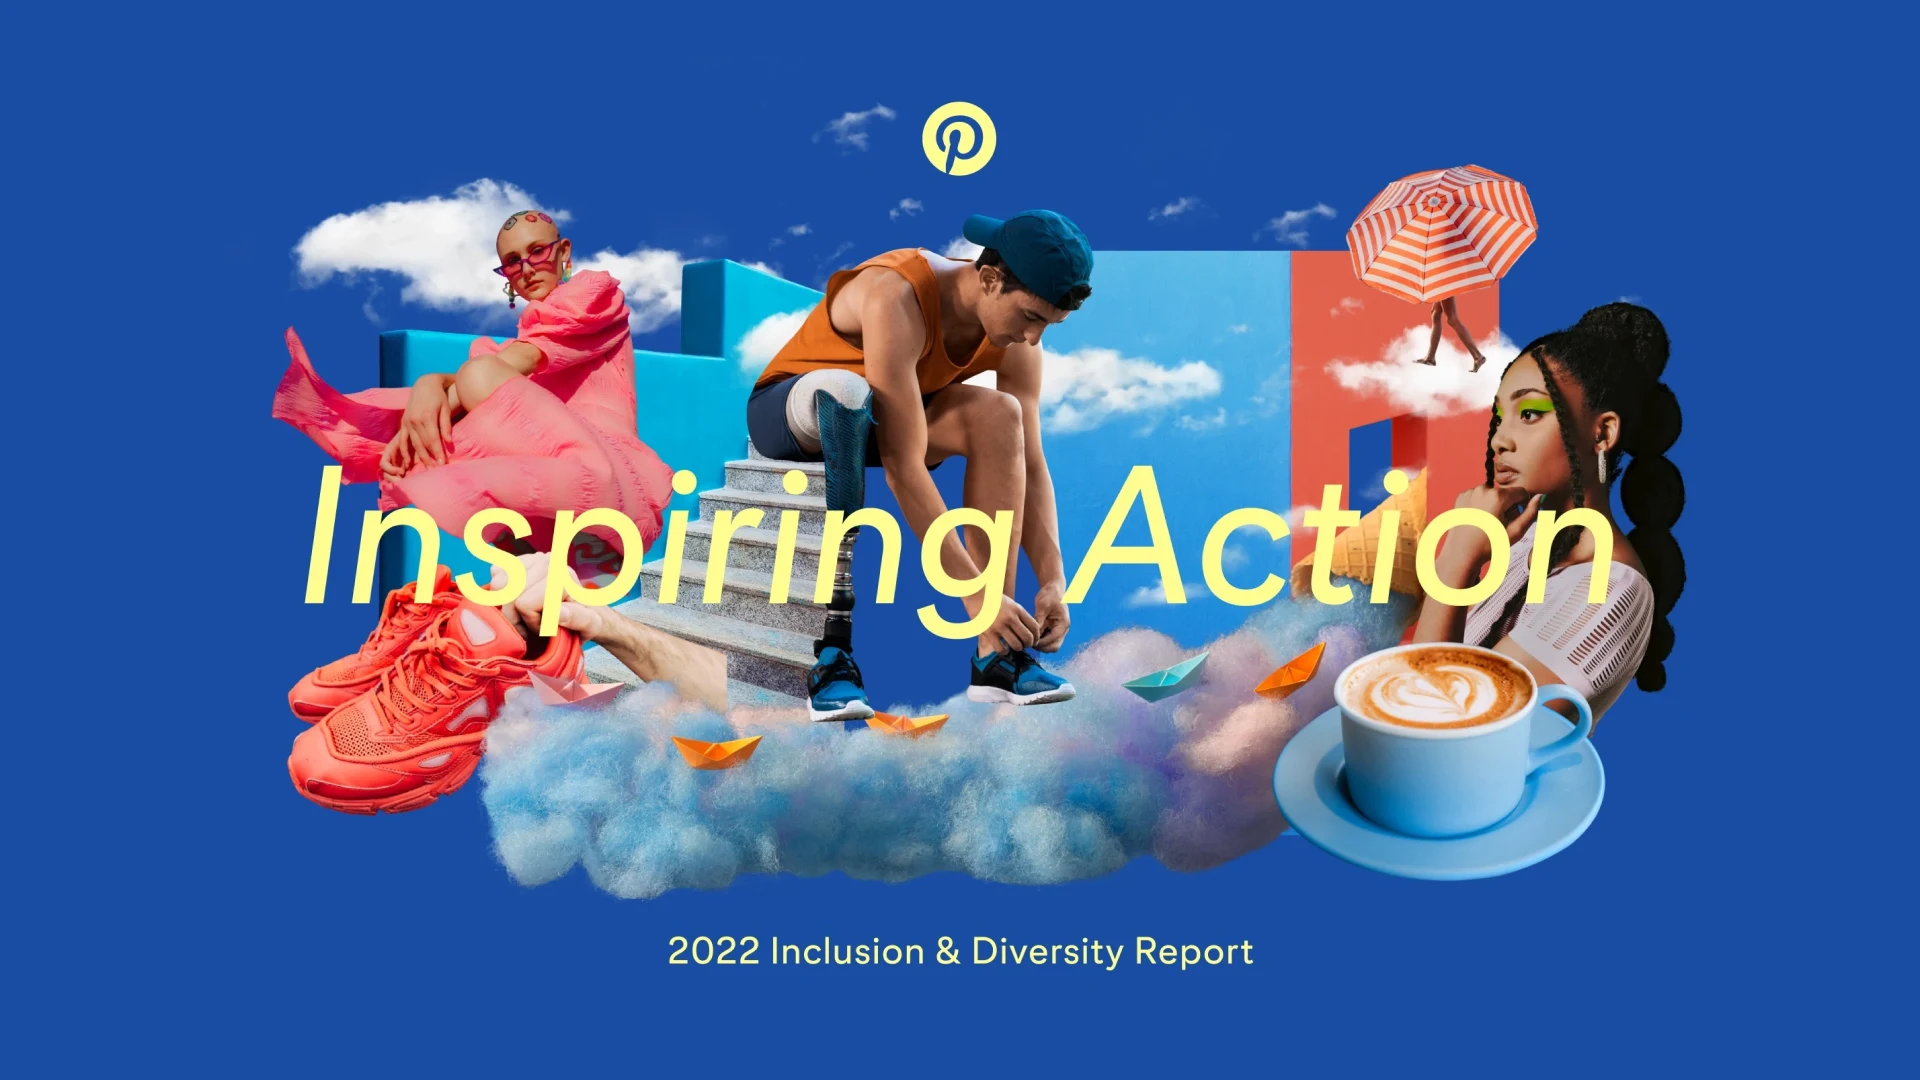 The words ‘Inspiring action’ are displayed over a collage of images depicting Pinterest-inspired fashion, beauty, food and lifestyle trends